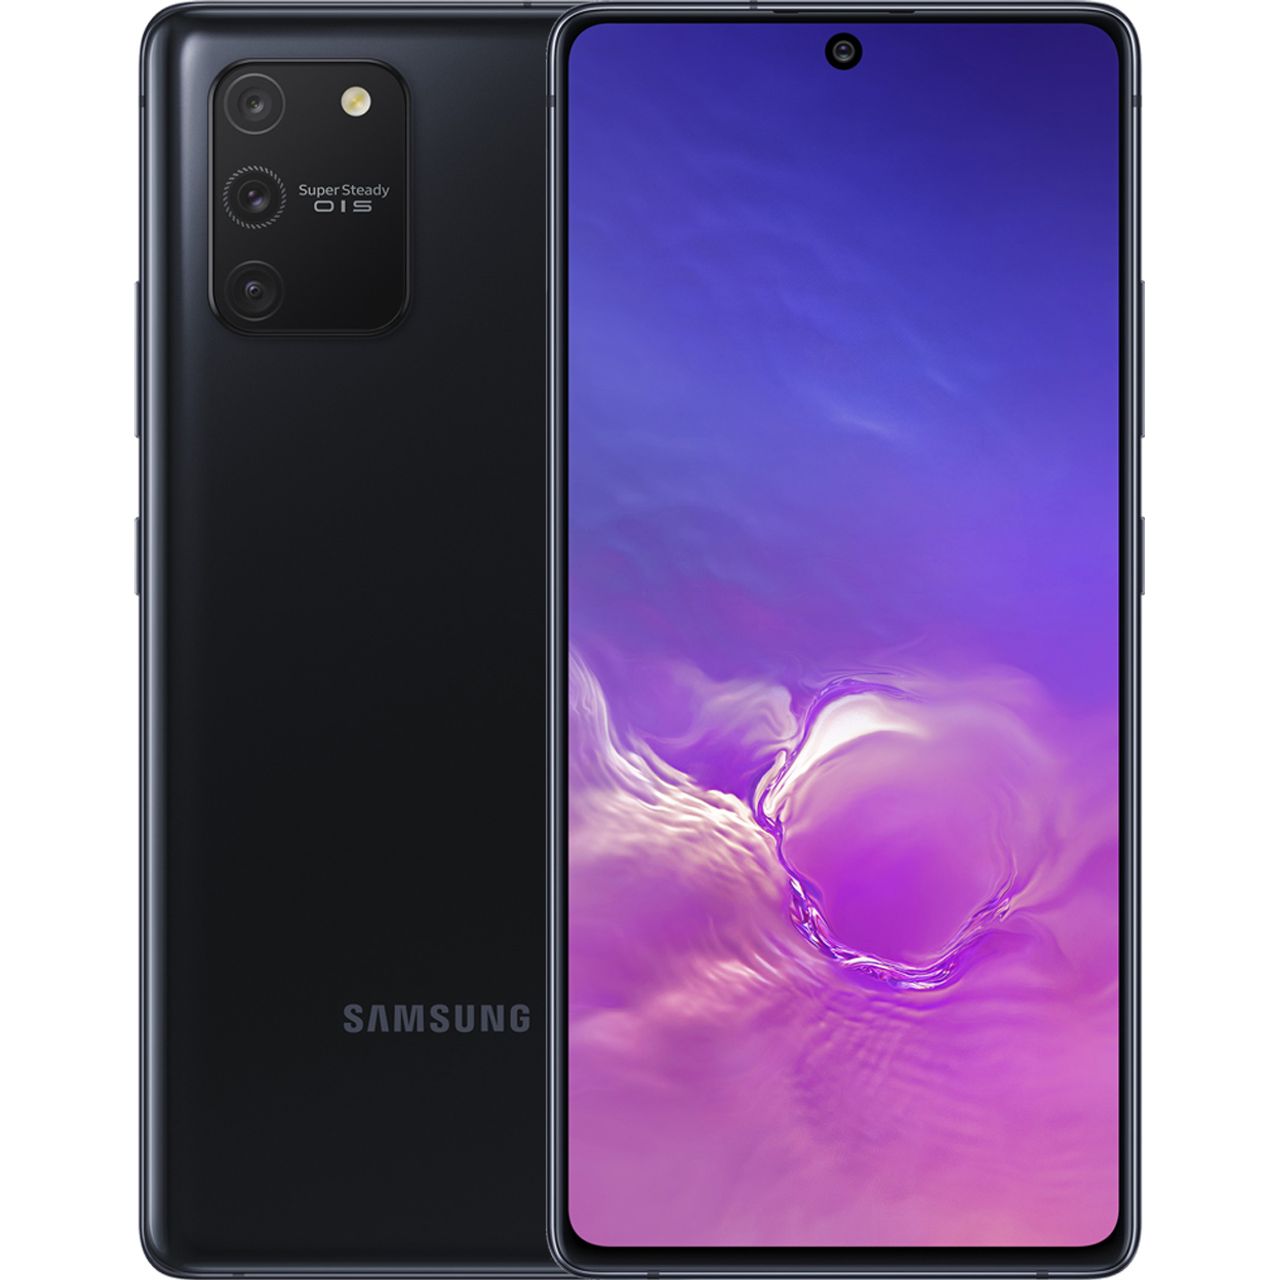 Samsung Galaxy S10 Lite Smartphone in Black Review